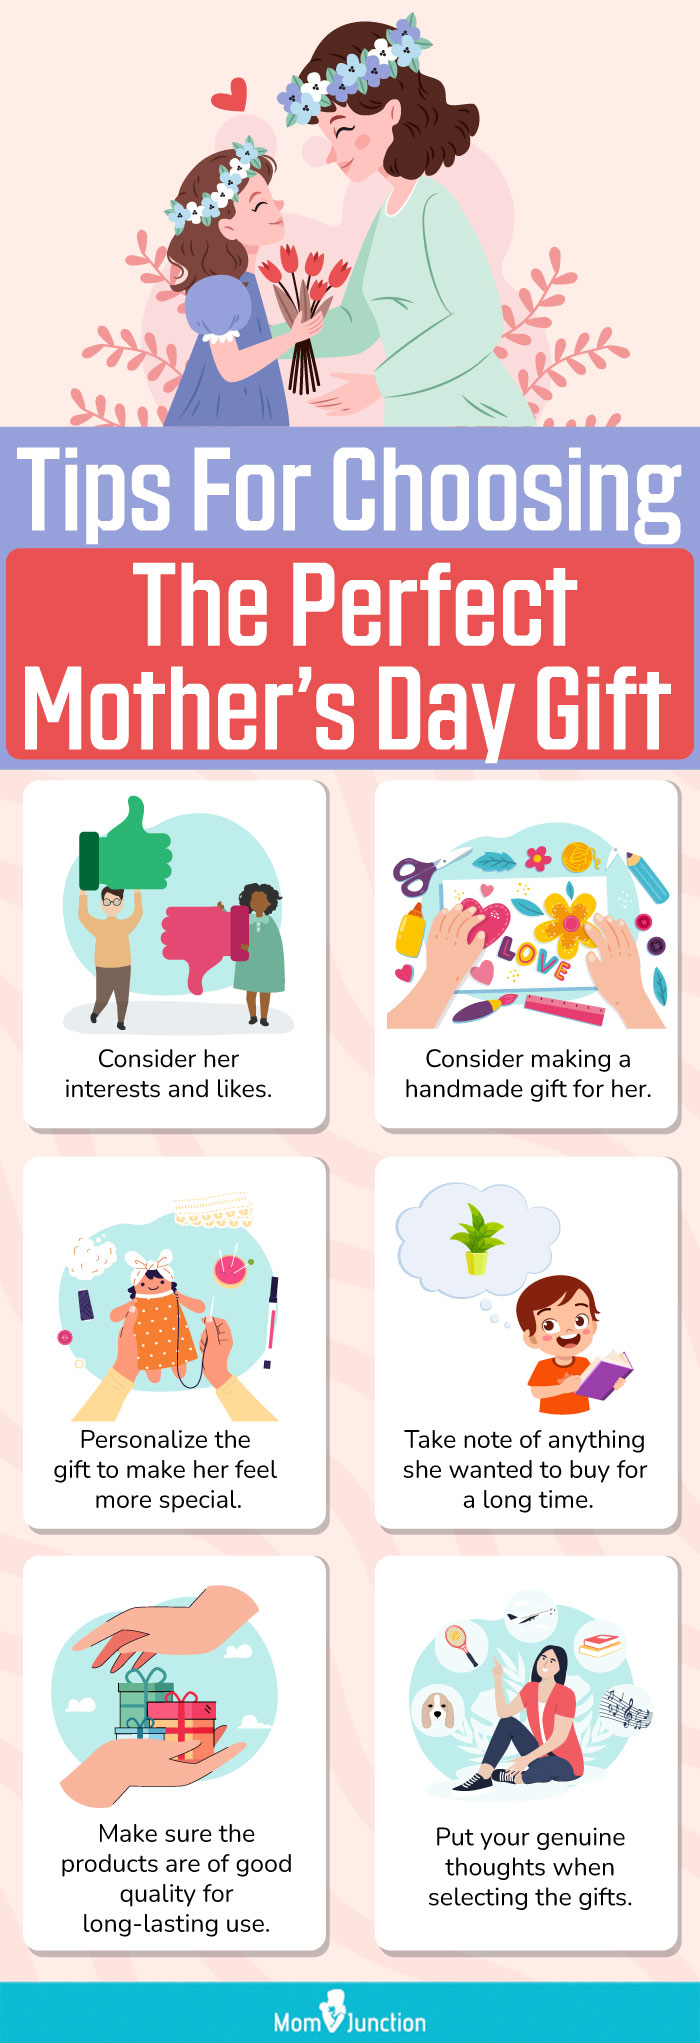 Tips For Choosing The Perfect Mother’s Day Gift (infographic)